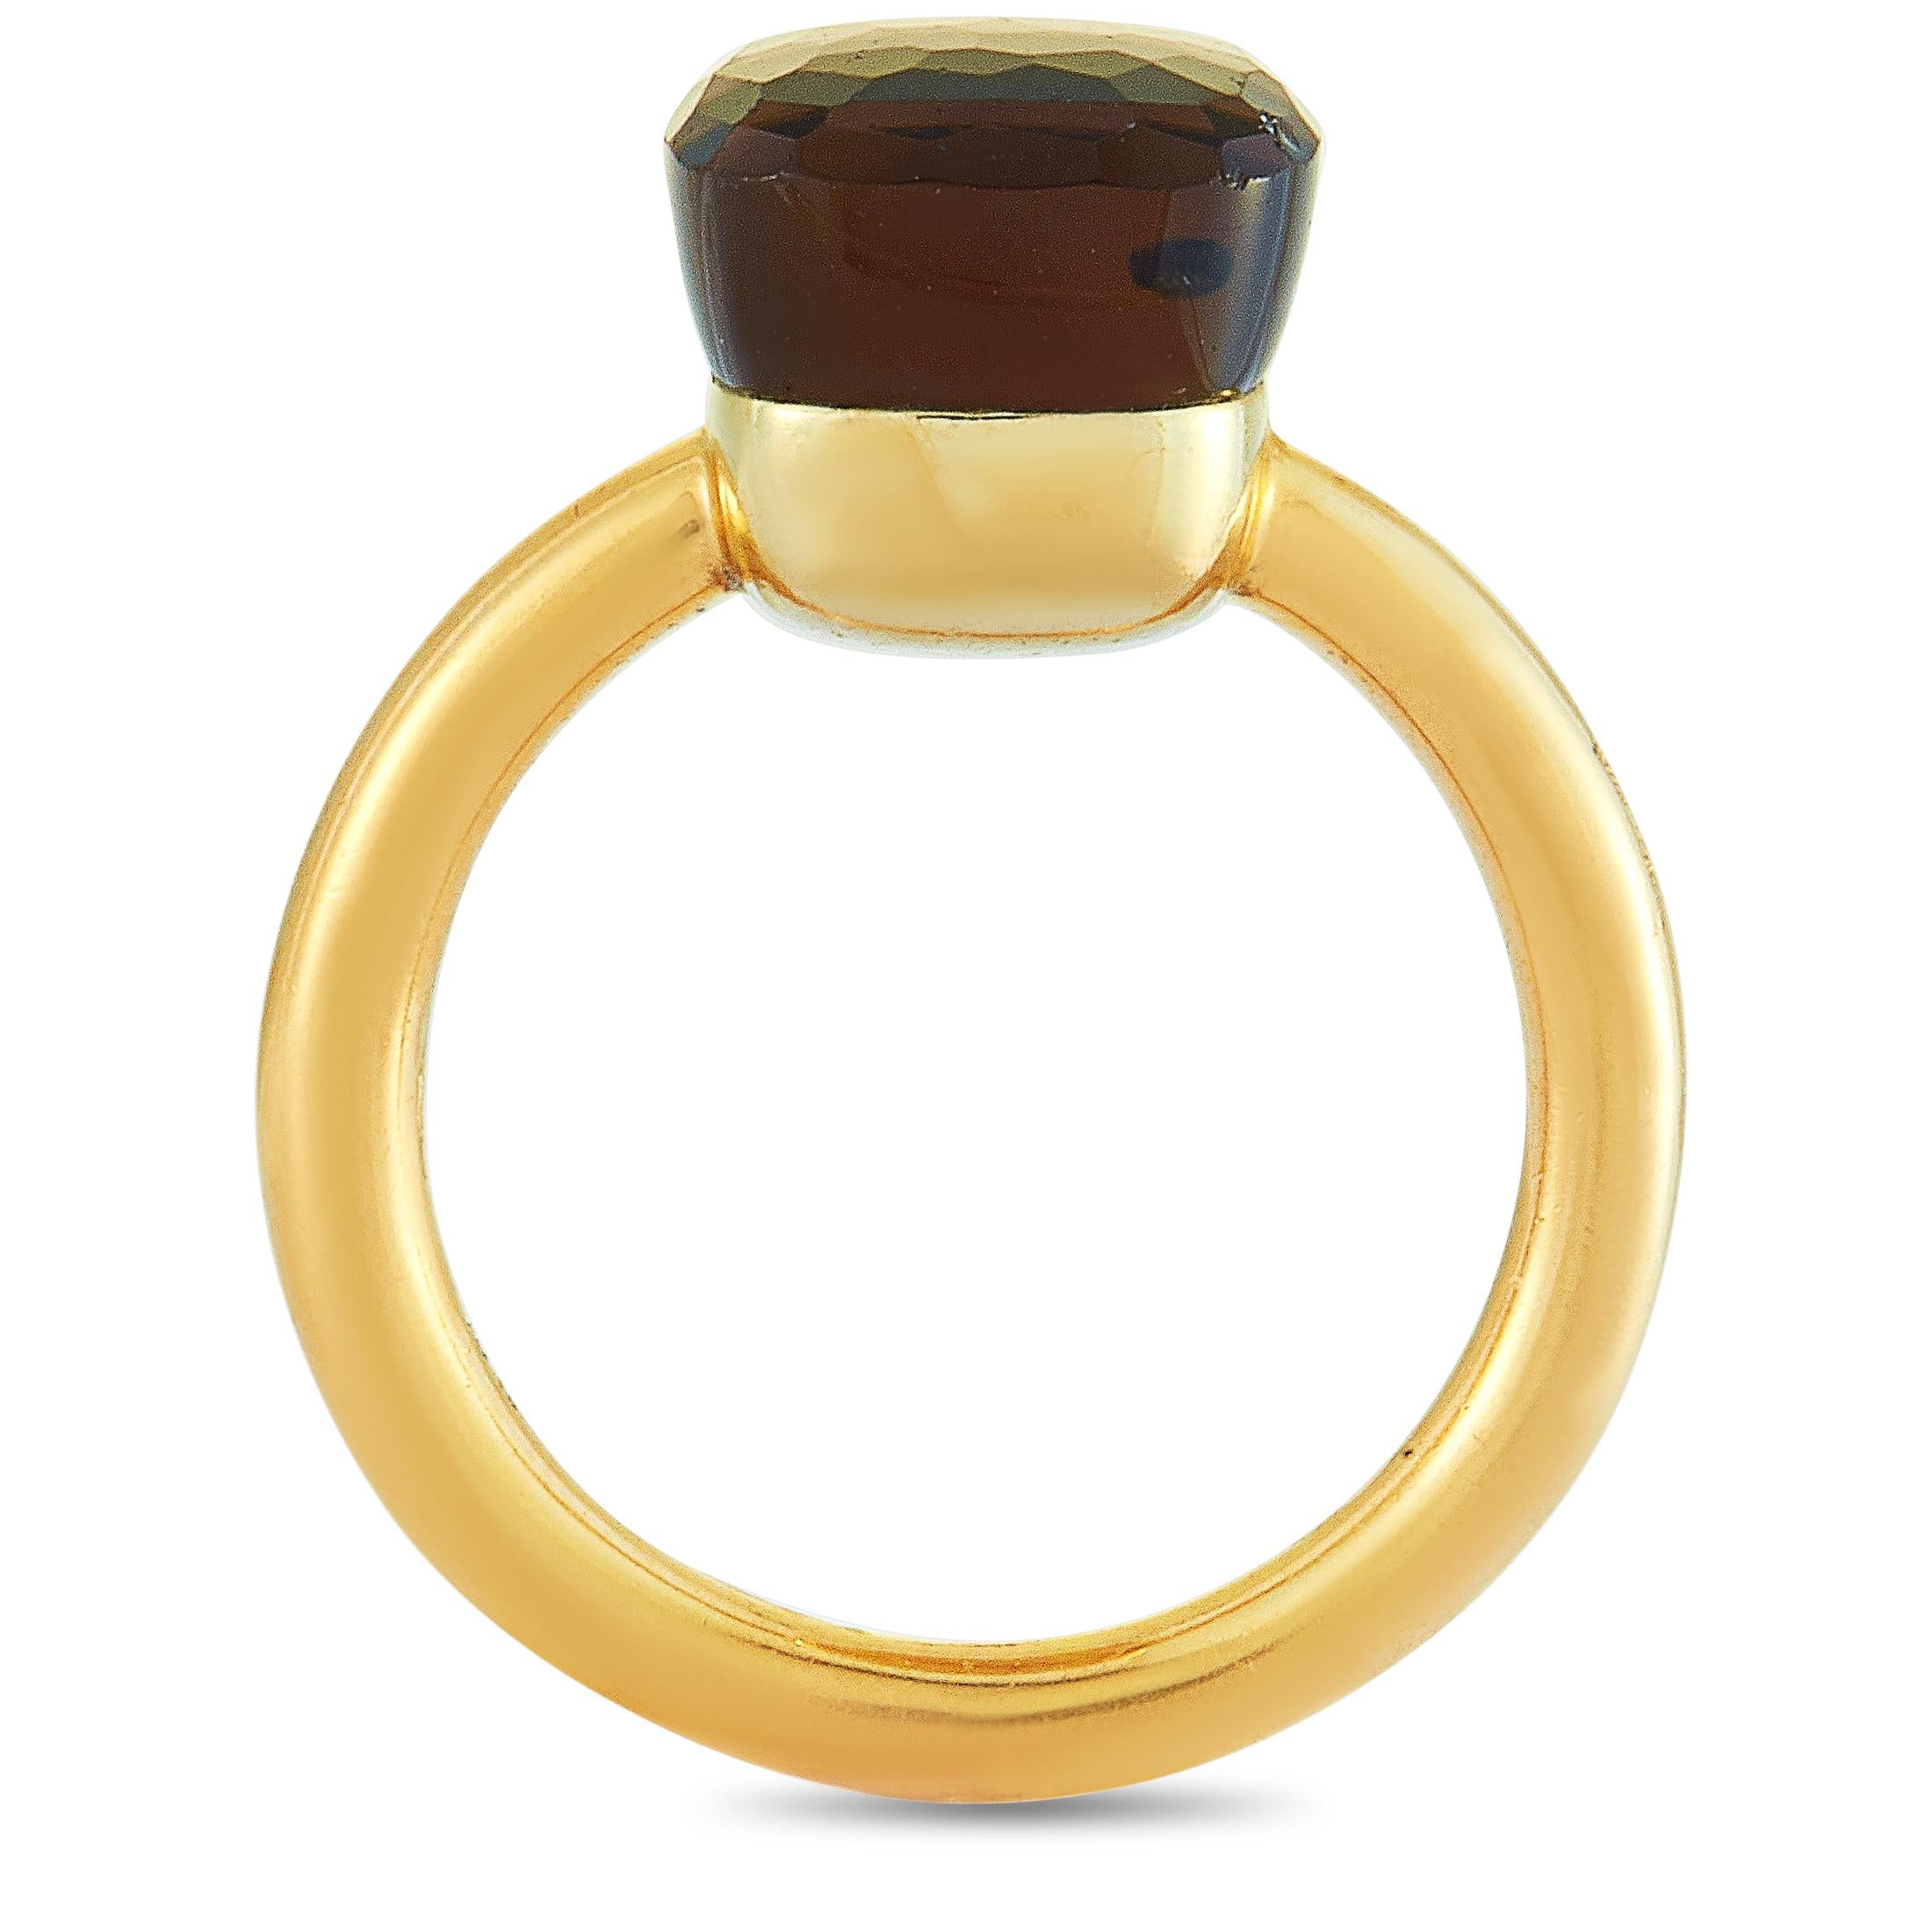 The Pomellato “Nudo” ring is crafted from 18K yellow gold and set with an onyx. The ring weighs 7.8 grams, boasting band thickness of 2 mm and top height of 10 mm, while top dimensions measure 10 by 10 mm.
Ring Size: 7.5

This item is offered in